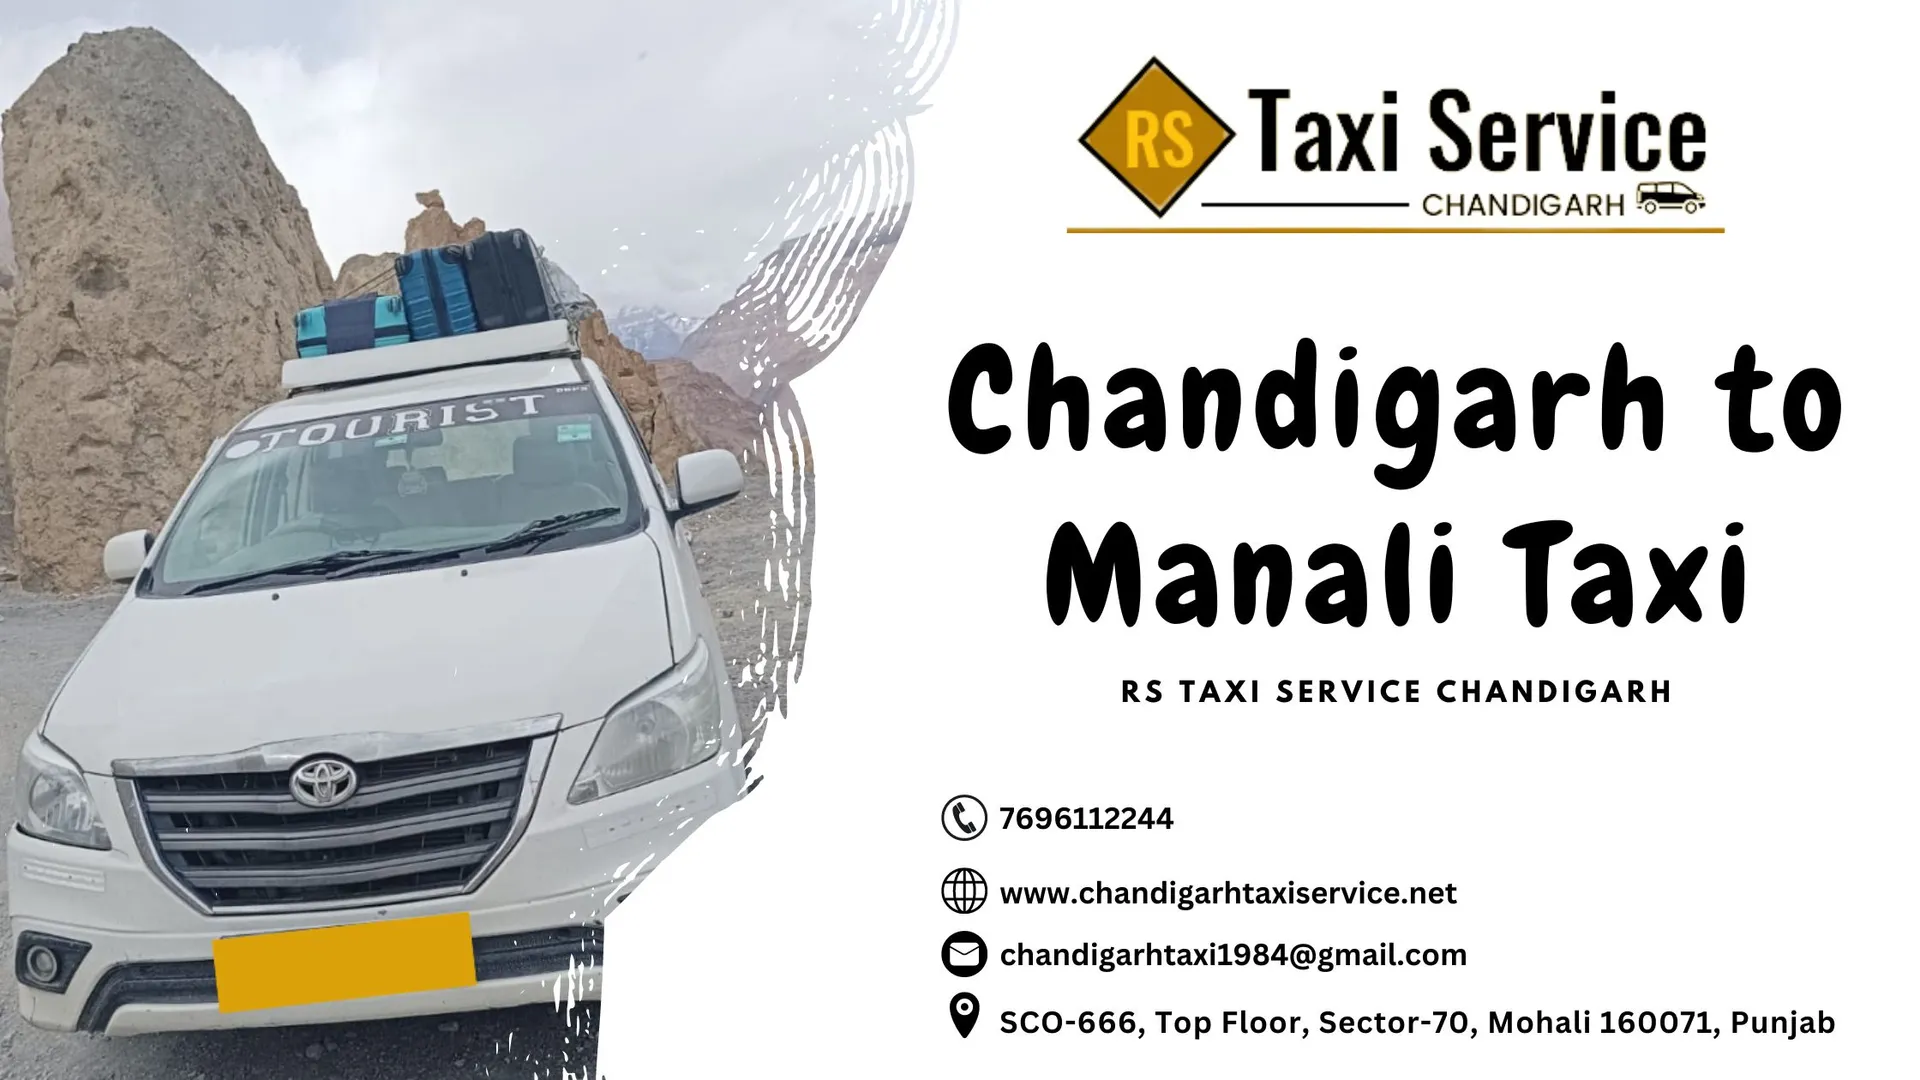 RS Taxi Service Chandigarh offers an unforgettable travel experience from Chandigarh to Manali with our reliable and comfortable taxi service. Whether you're a nature enthusiast or seeking a serene escape, our Chandigarh to Manali Taxi is the ideal choice for your journey. 

Book your ride now and let the adventure begin! https://www.chandigarhtaxiservice.net/chandigarh-manali-taxi

Contact Person Name:- Ravi Salaria

Contact no. 7696112244

Address:- SCO-666, Top Floor, Sector-70, Mohali 160071, Punjab

Website:- https://www.chandigarhtaxiservice.net/

Email:- chandigarhtaxi1984@gmail.com